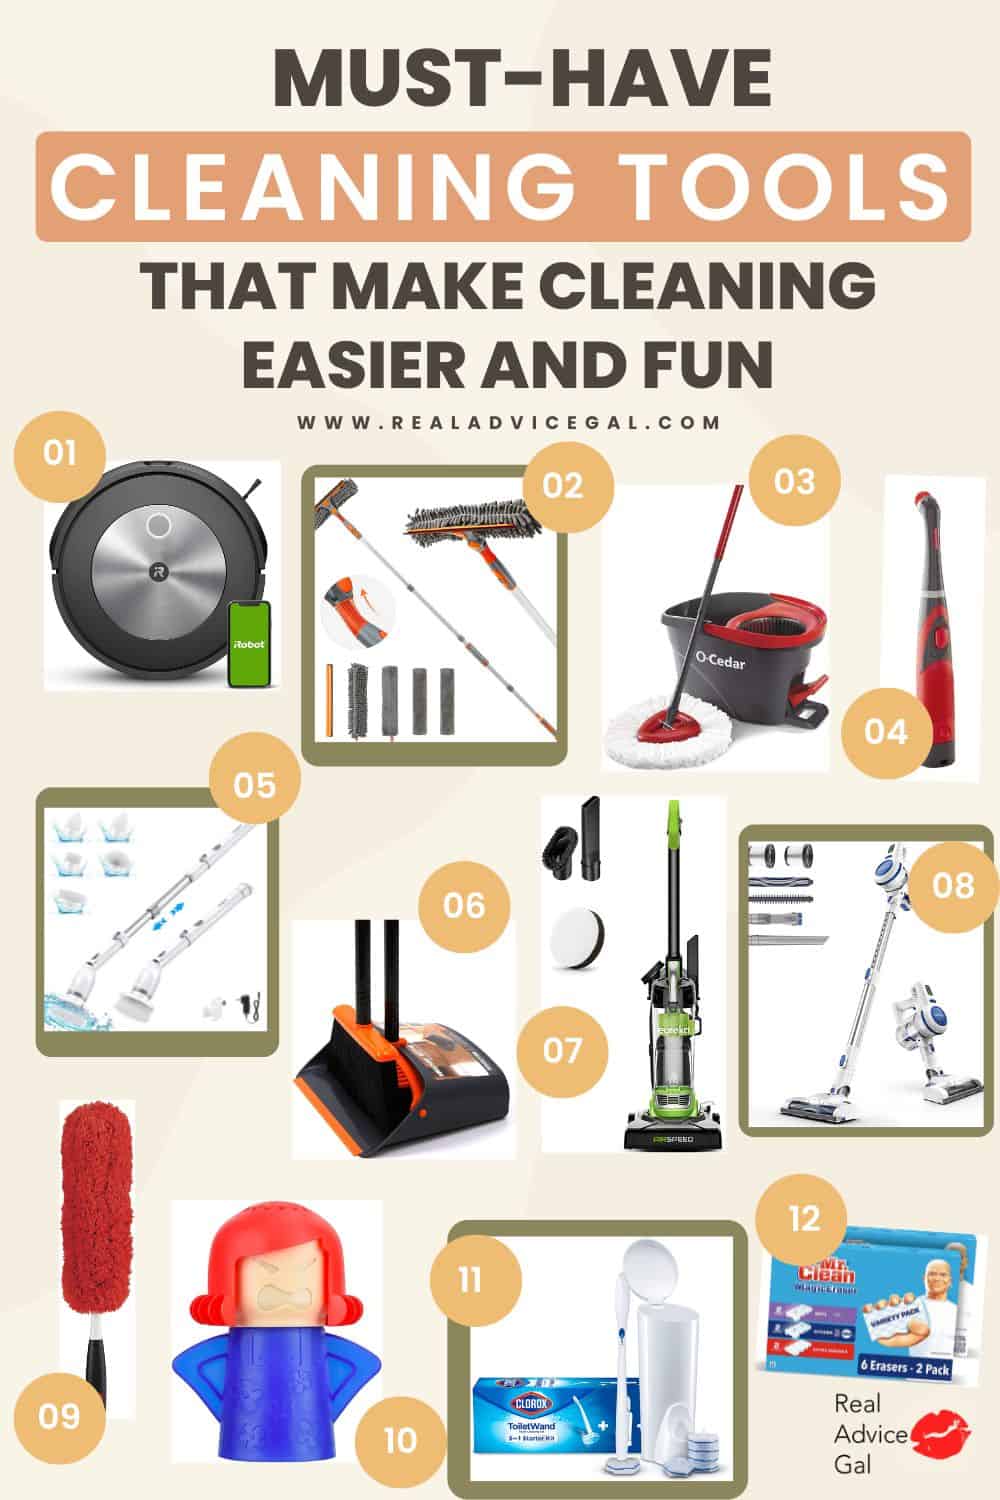 Must-Have Cleaning Tools That Make Cleaning Easier and Fun